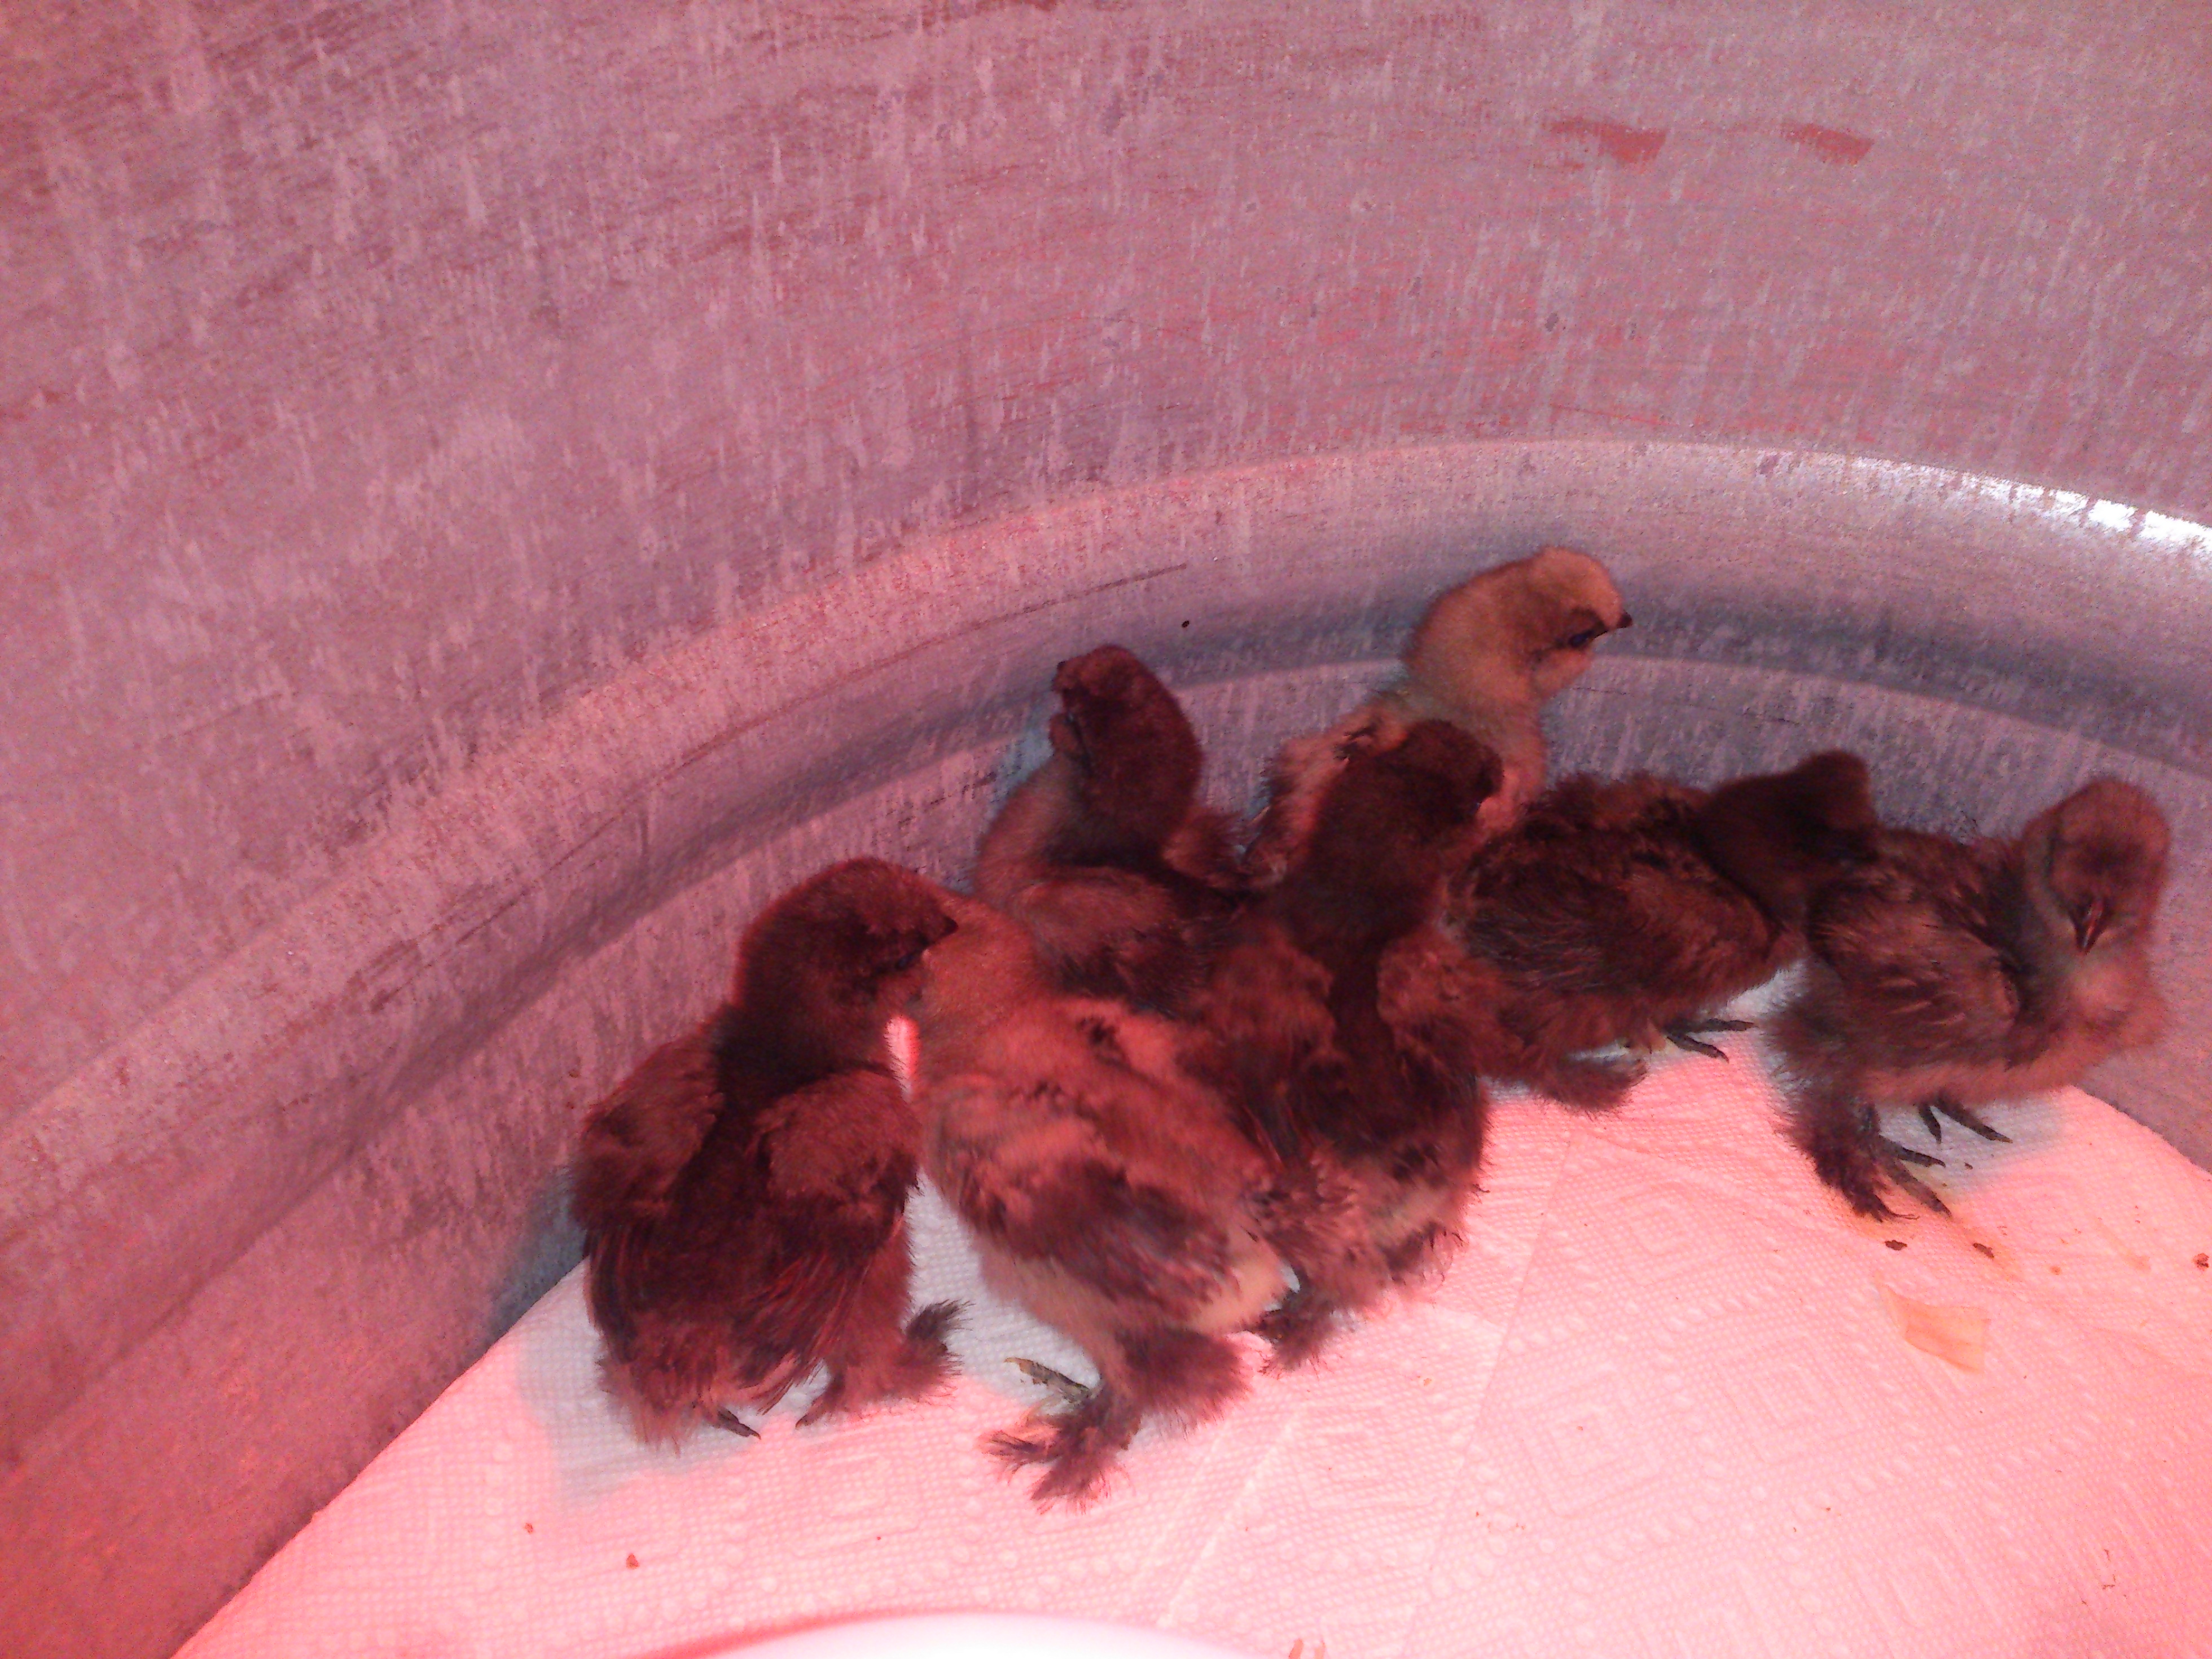 Breeder said chicks were anywhere between 5-7 days old with 1 being between 2-3 weeks old.